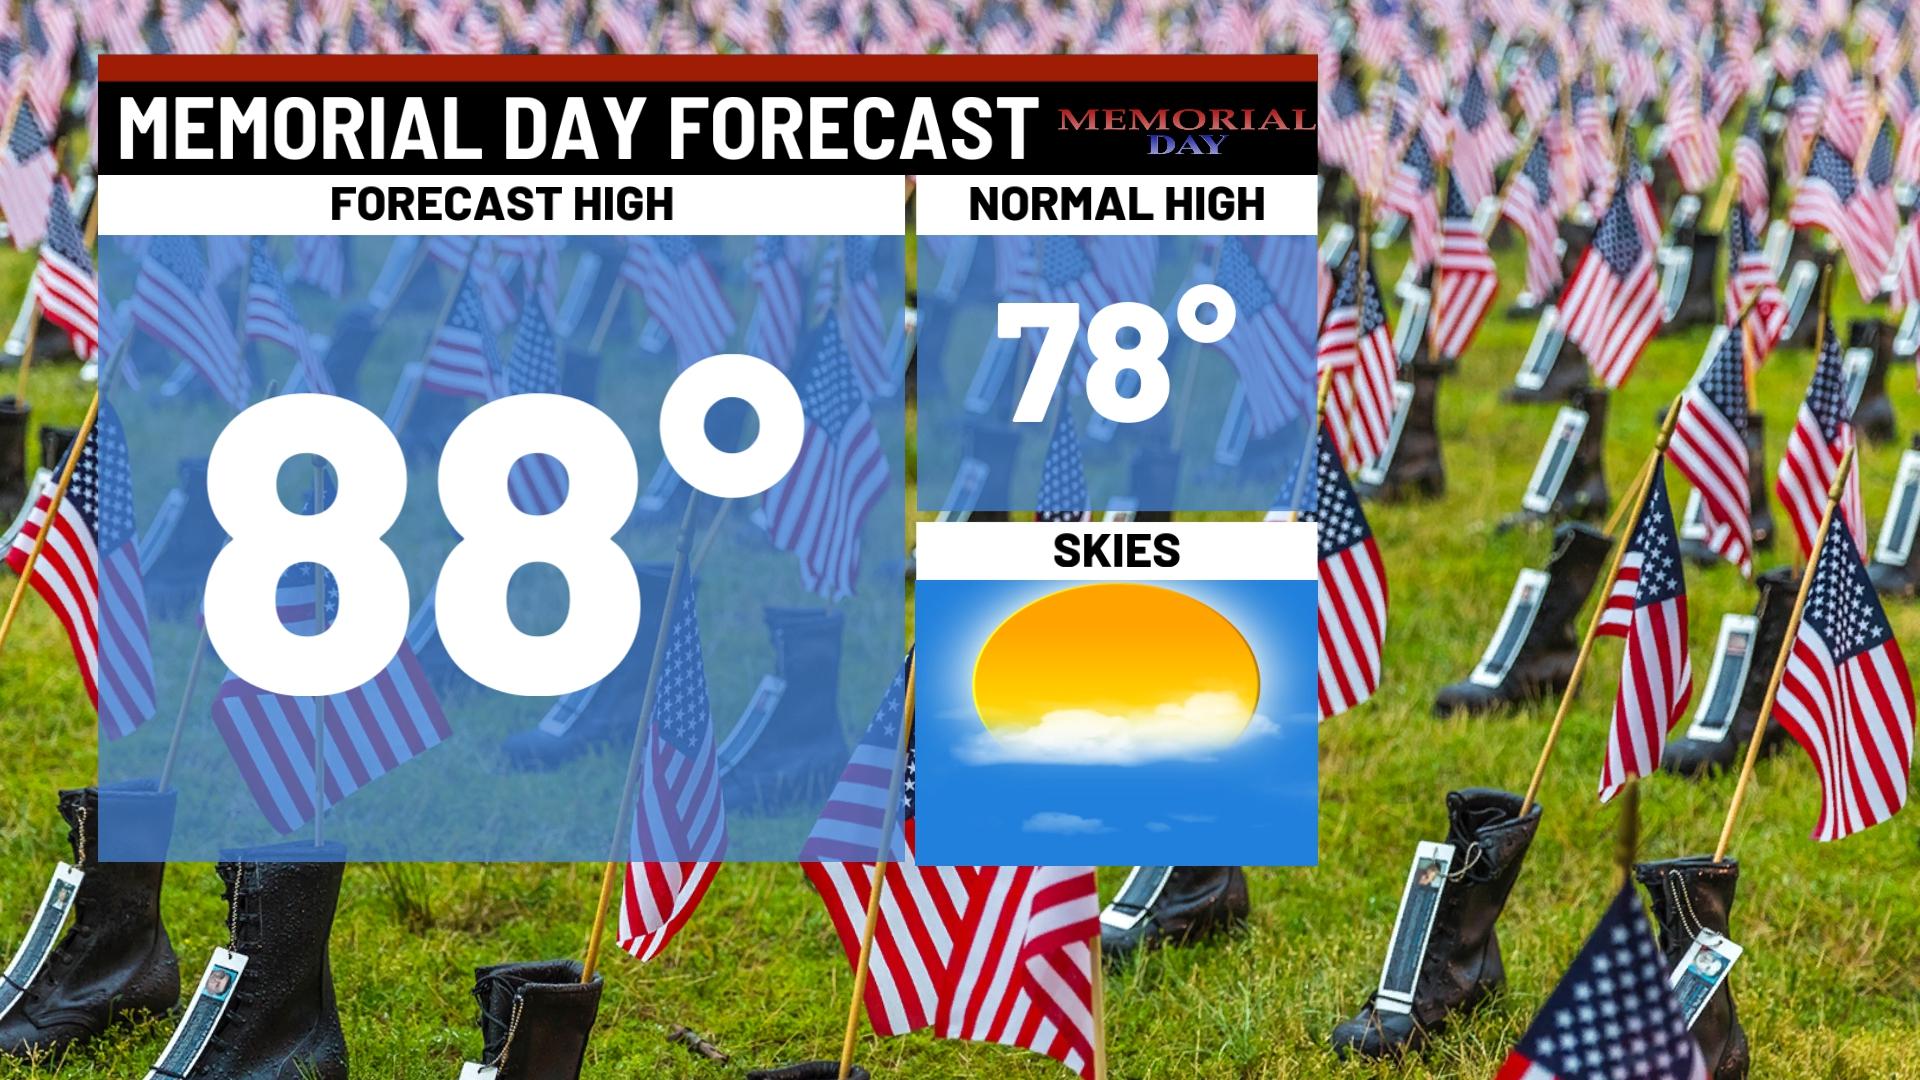 Warm and breezy Memorial Day WISHTV Indianapolis News Indiana